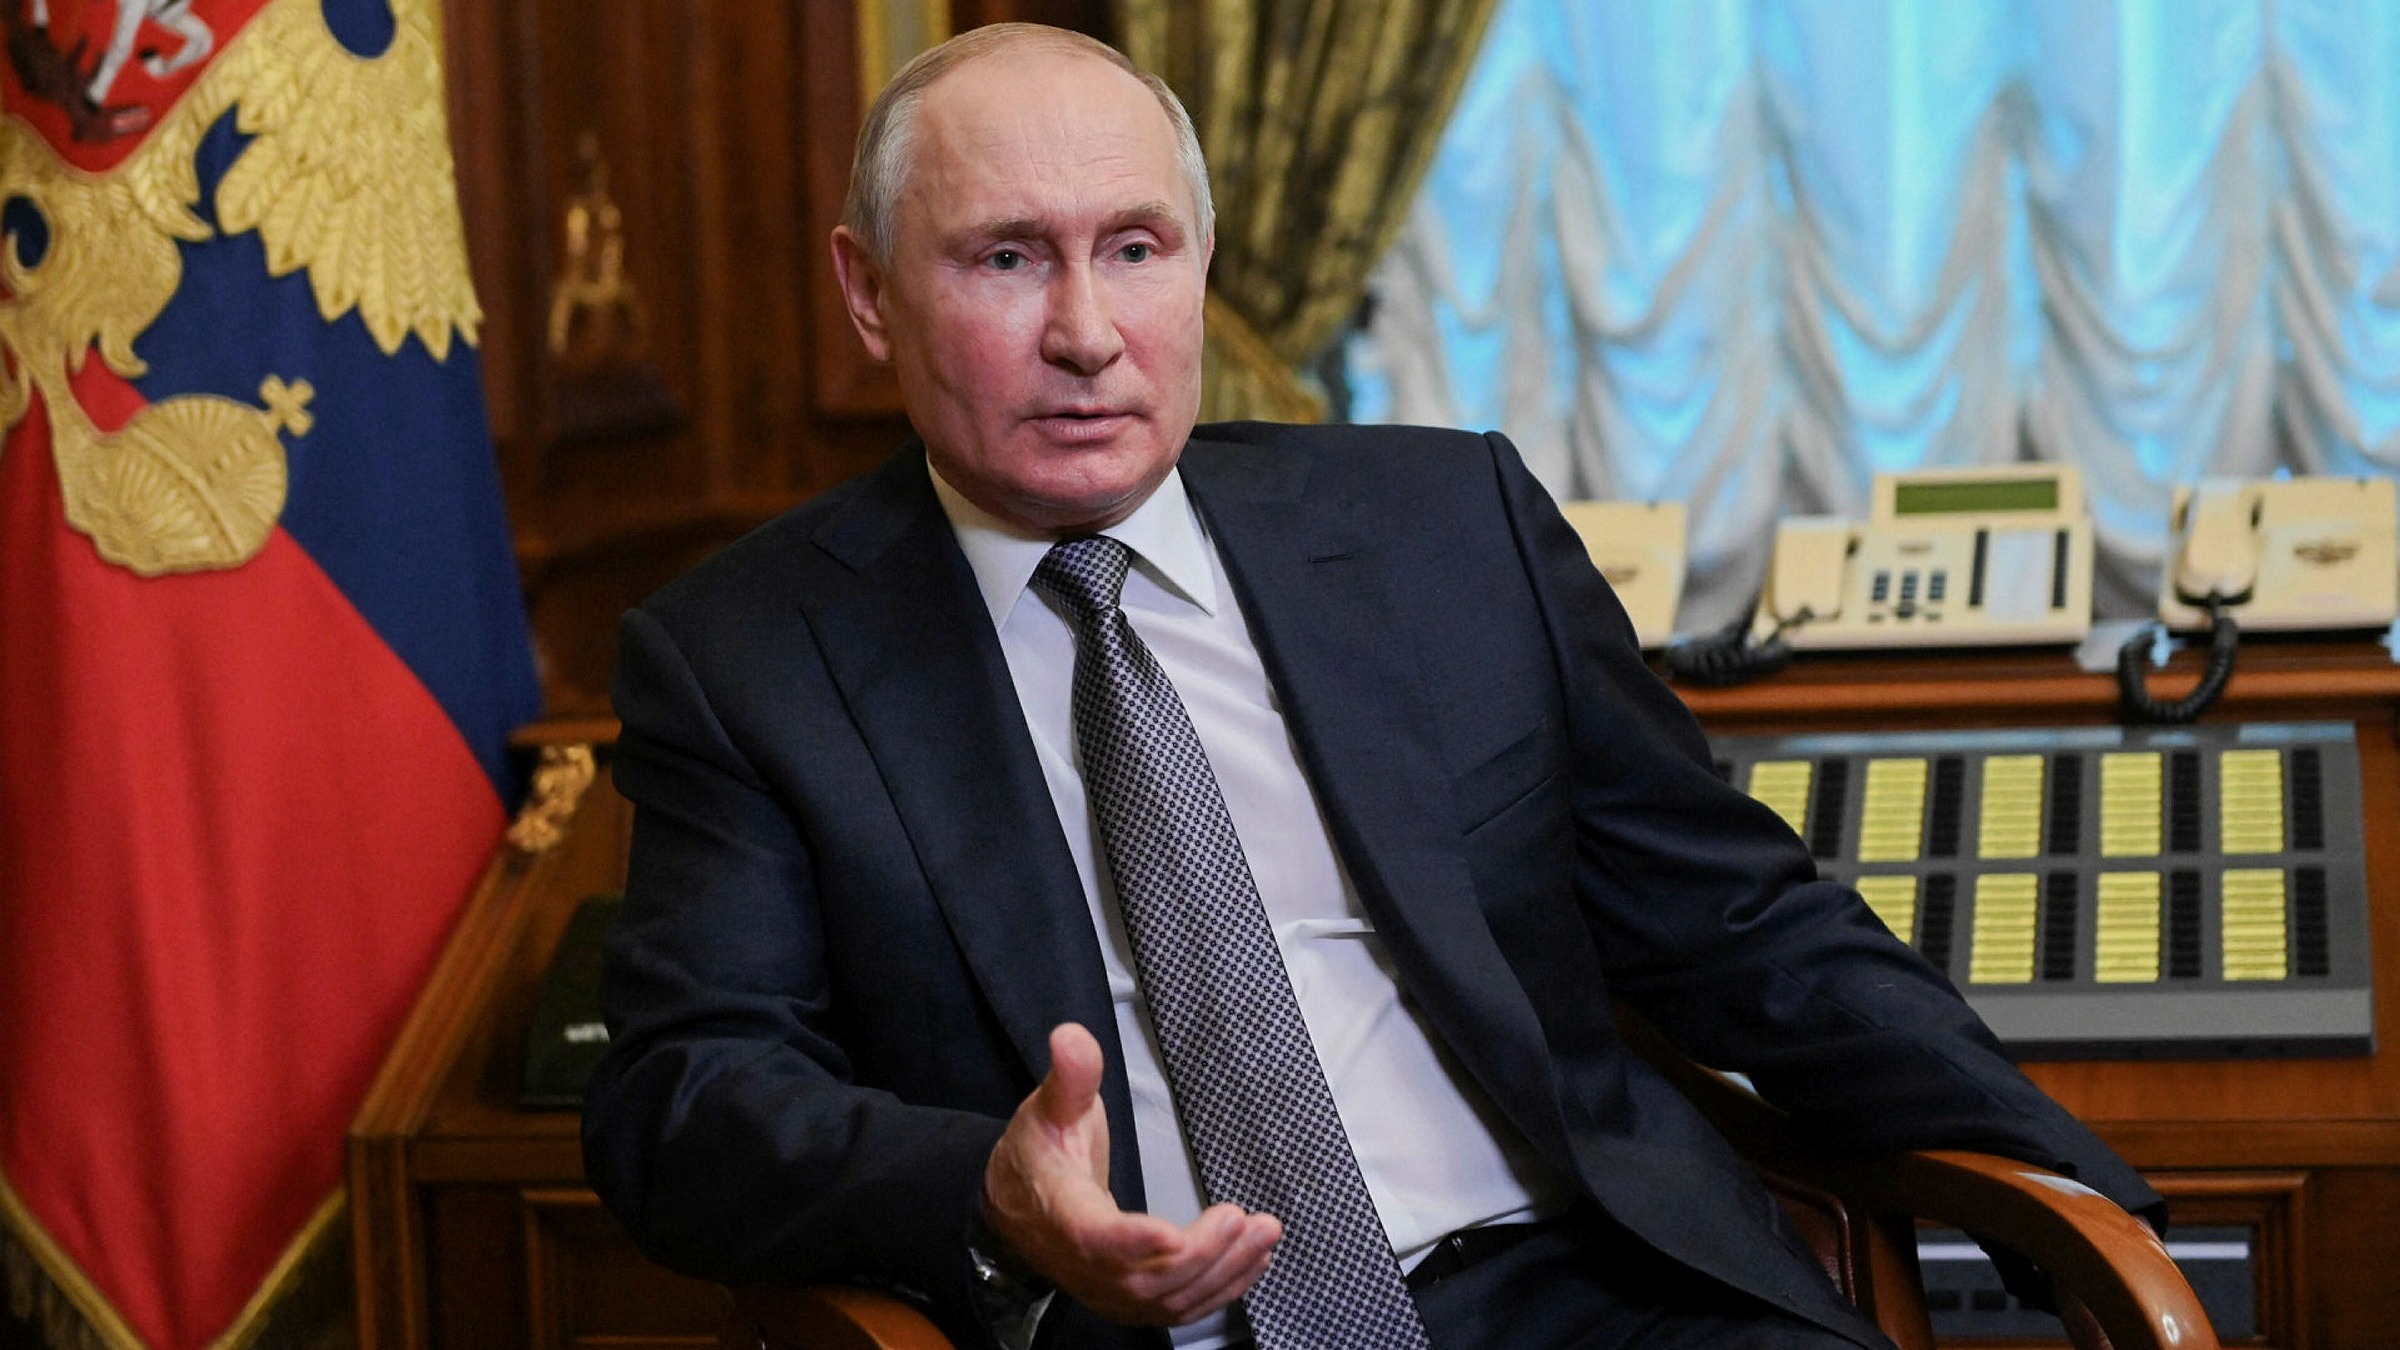 Warning from Putin to the West: We will respond militarily and technically